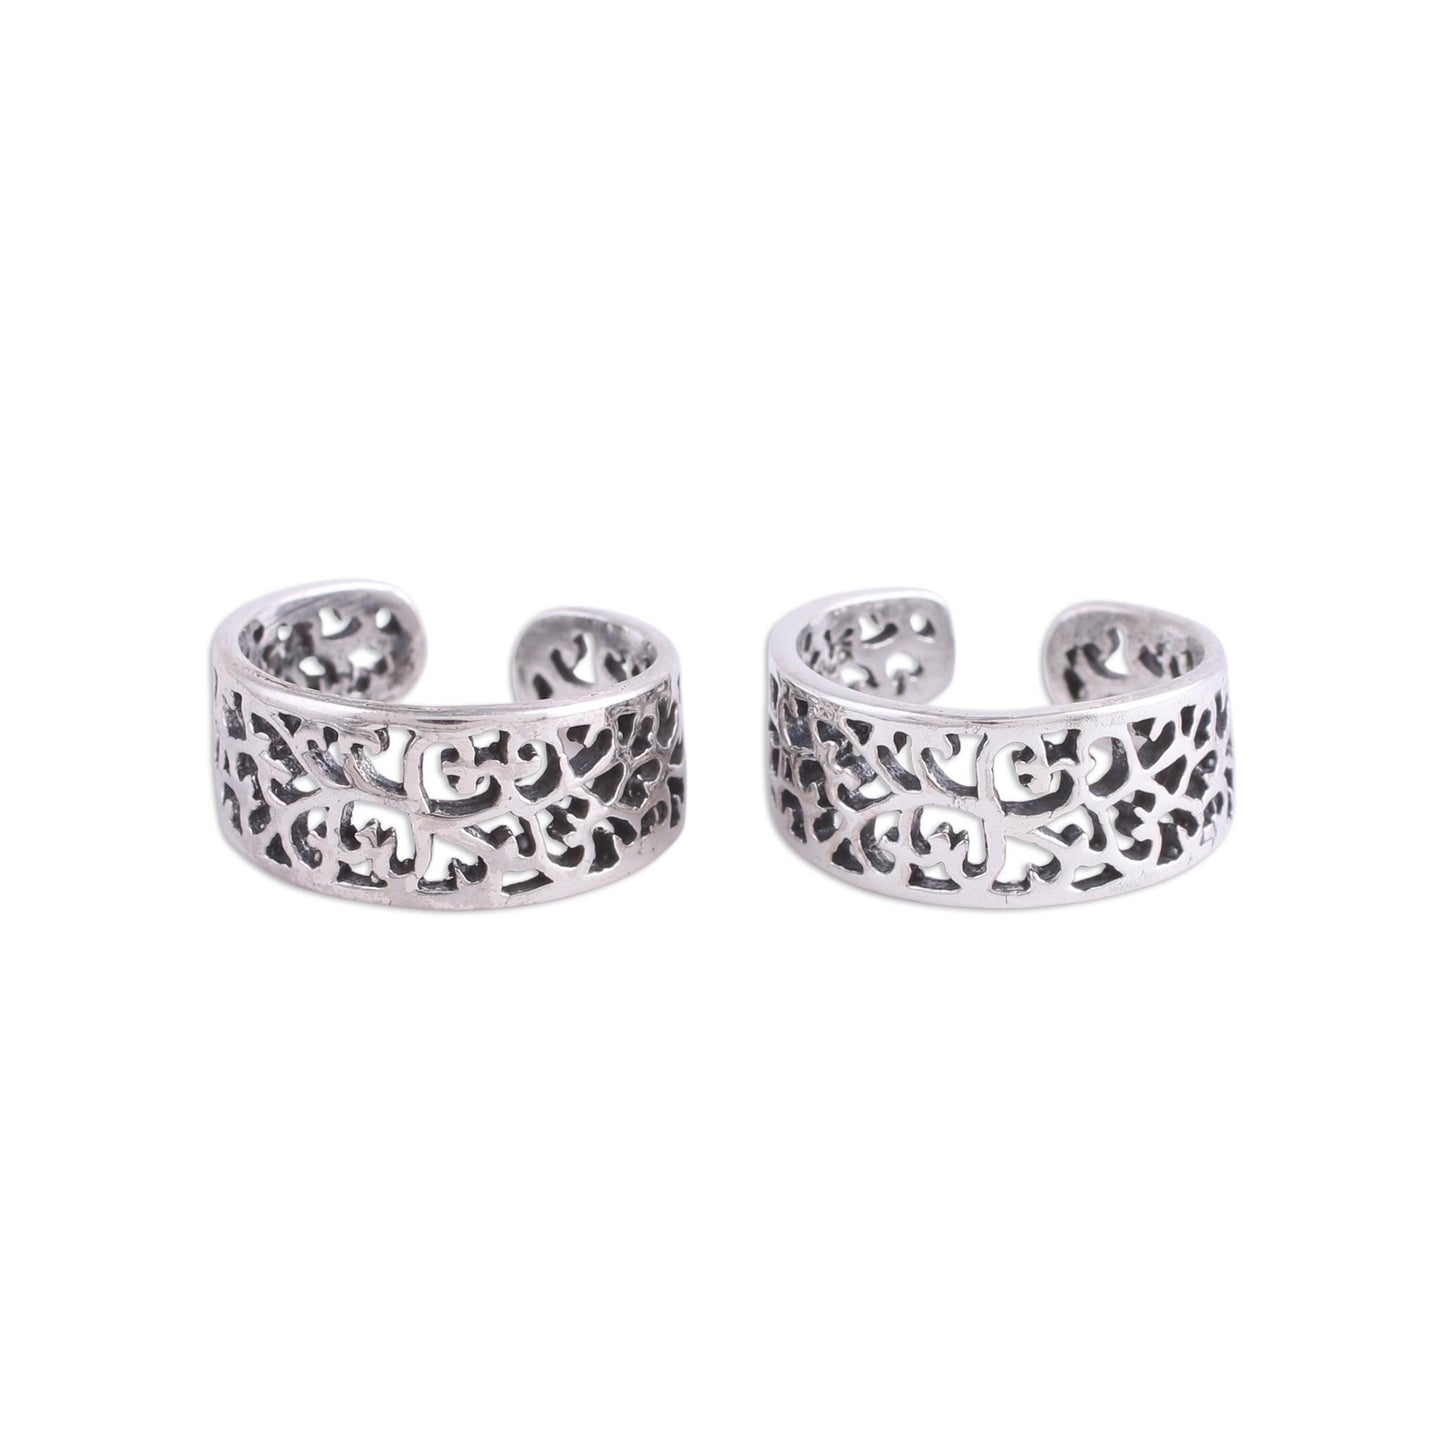 Alluring Vines Artisan Crafted Sterling Silver Toe Rings (Pair) from India